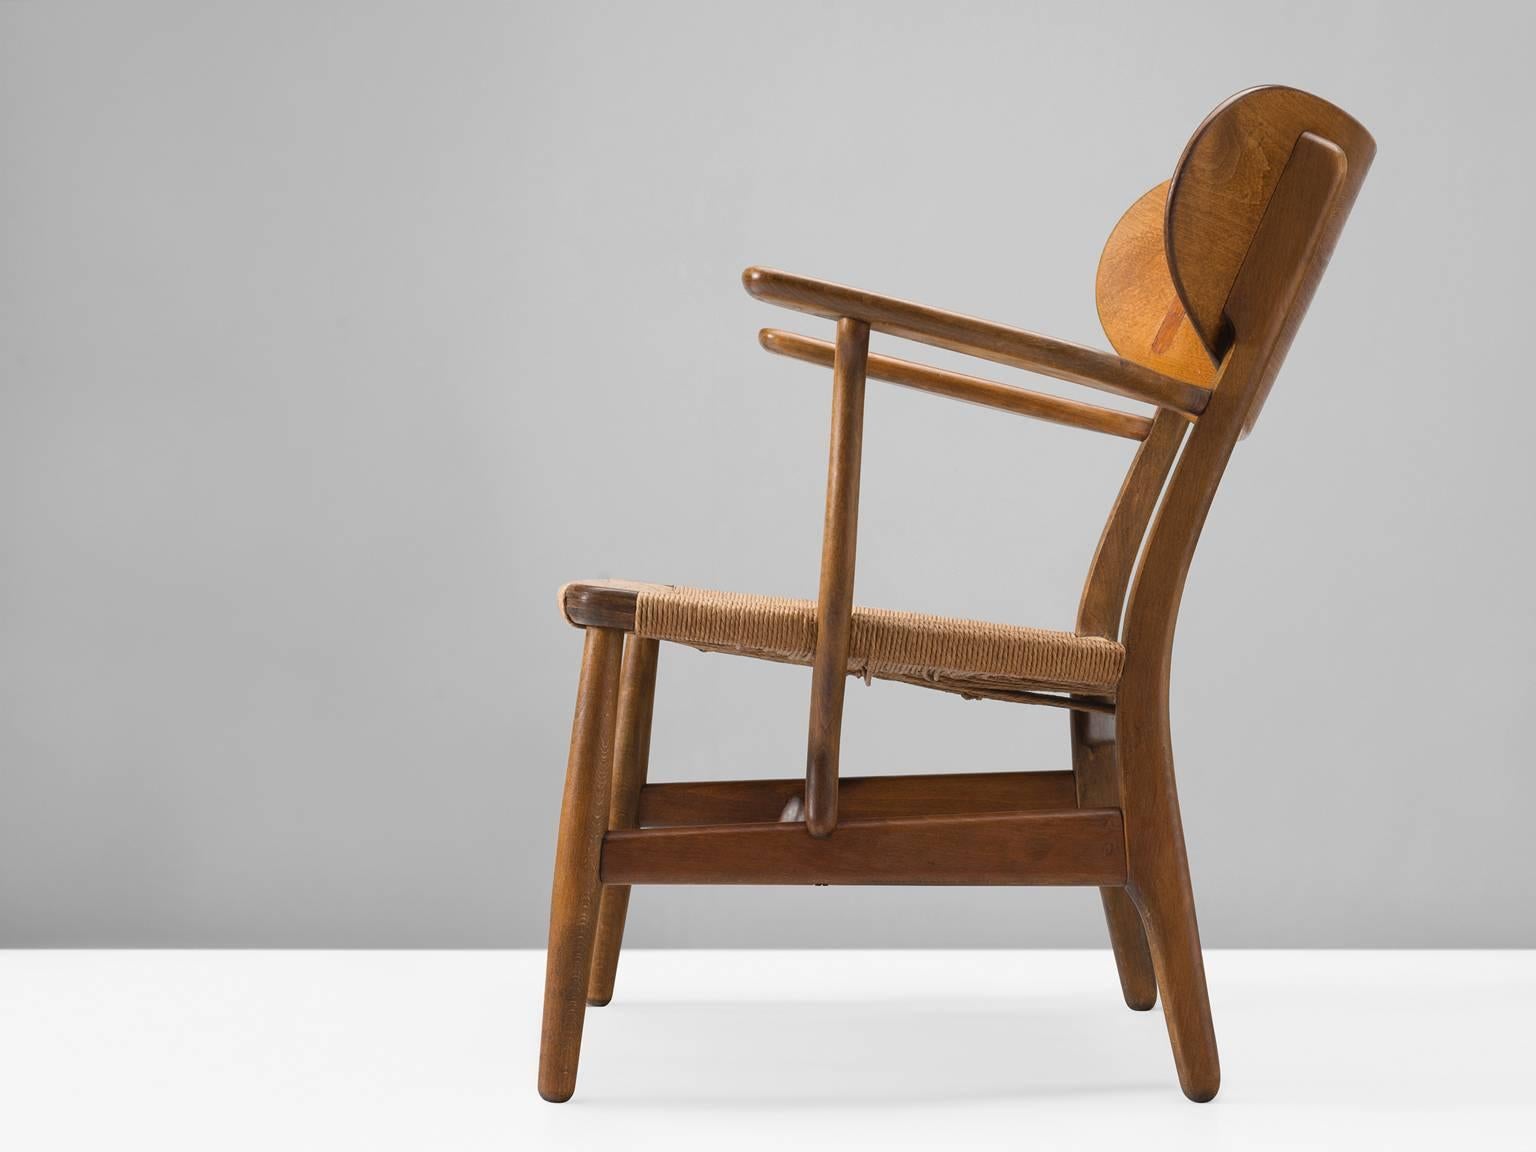 Hans J. Wegner for Carl Hansen & Søn, armchair model CH22 by Denmark, 1950.

This chair is one of Wegner's early masterpieces for Carl Hansen. The chair bears the first number of a highly interesting collection that was realized during the